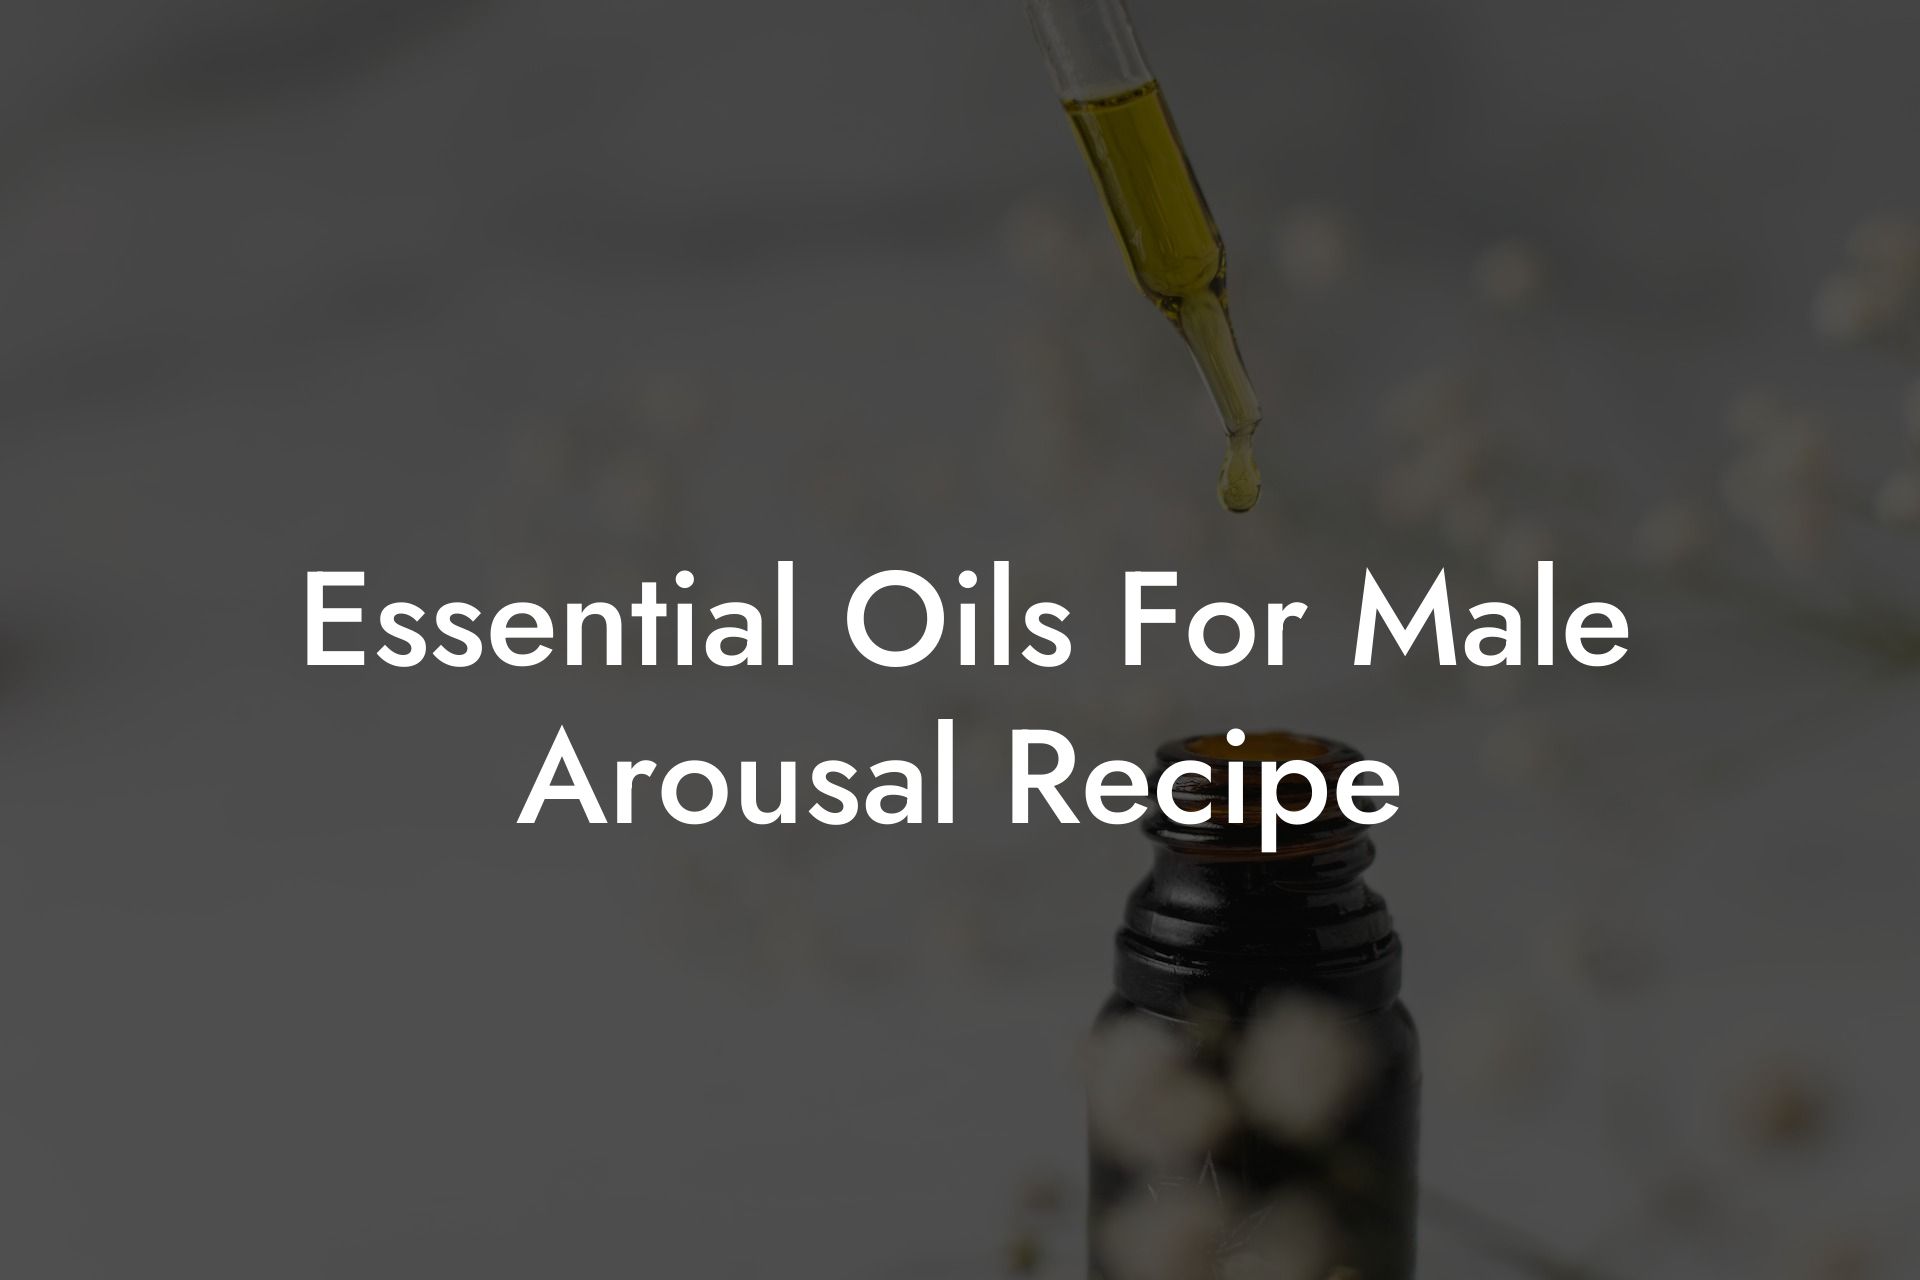 Essential Oils For Male Arousal Recipe